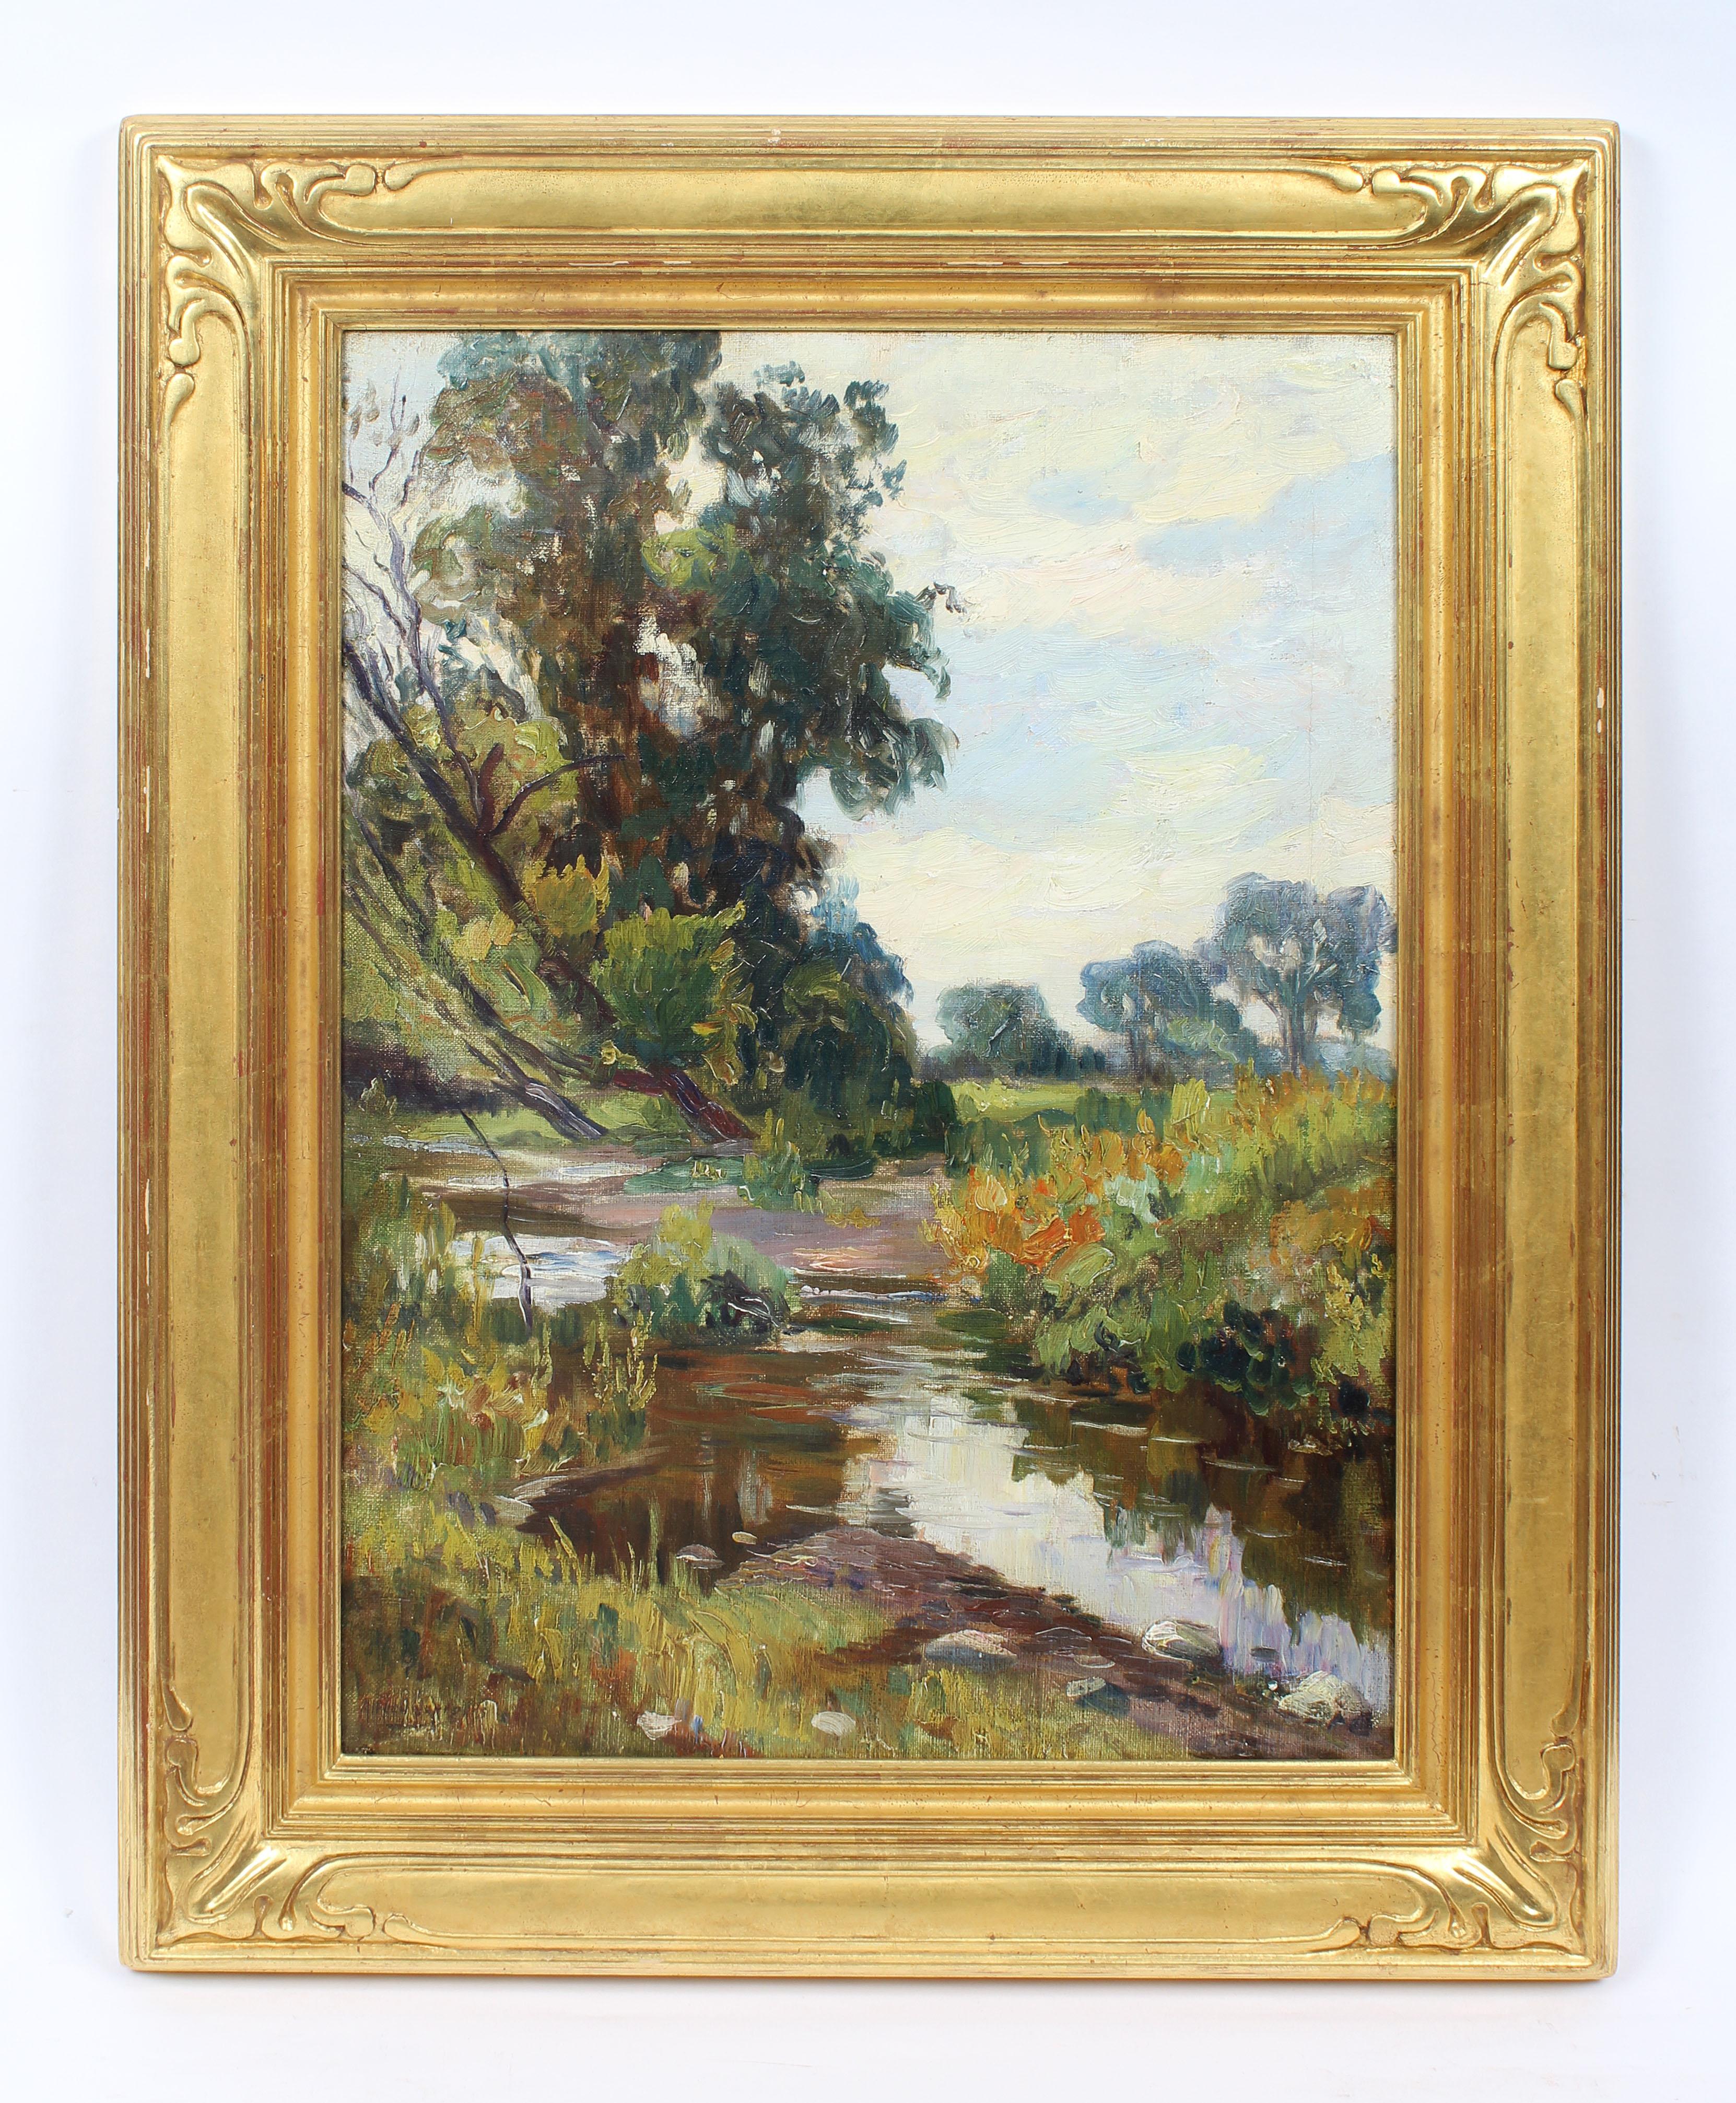 Antique American impressionist signed original landscape painting by Alfred Juergens (1866 - c.1934).  Oil on canvas, circa 1900. Signed.  Displayed in a giltwood frame.  Image, 18